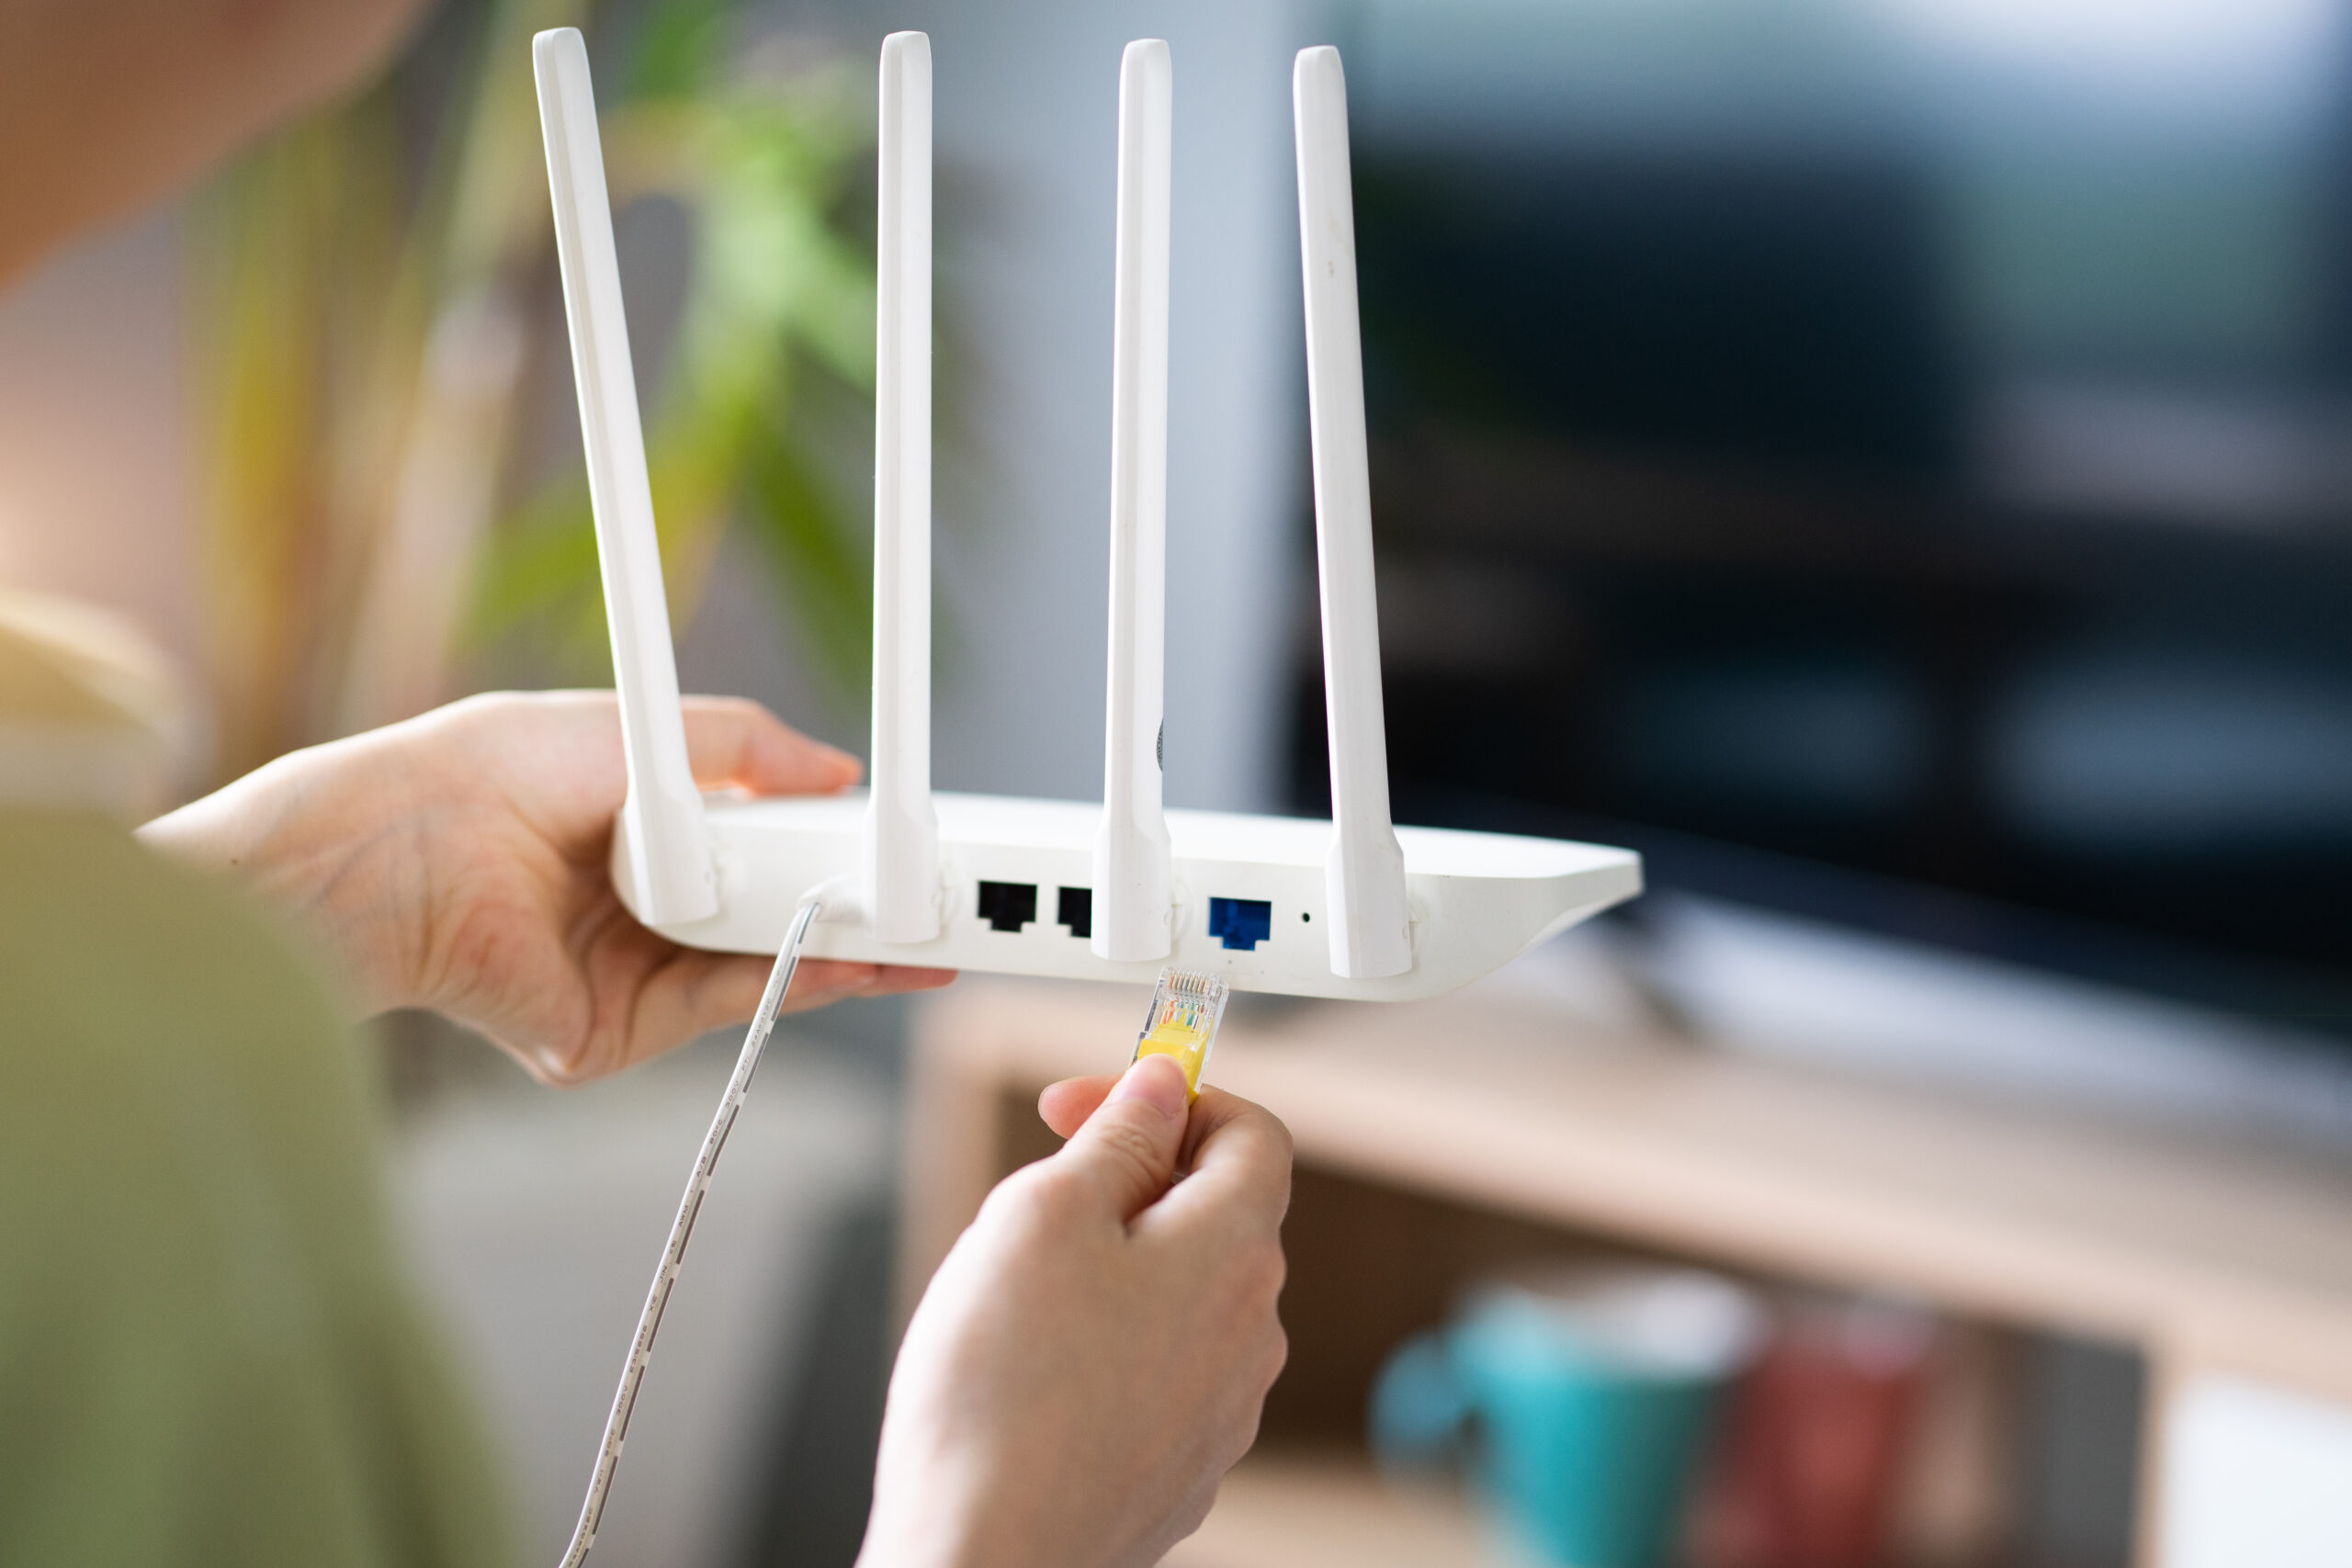 Learn about the router and the setup and login processes for it.